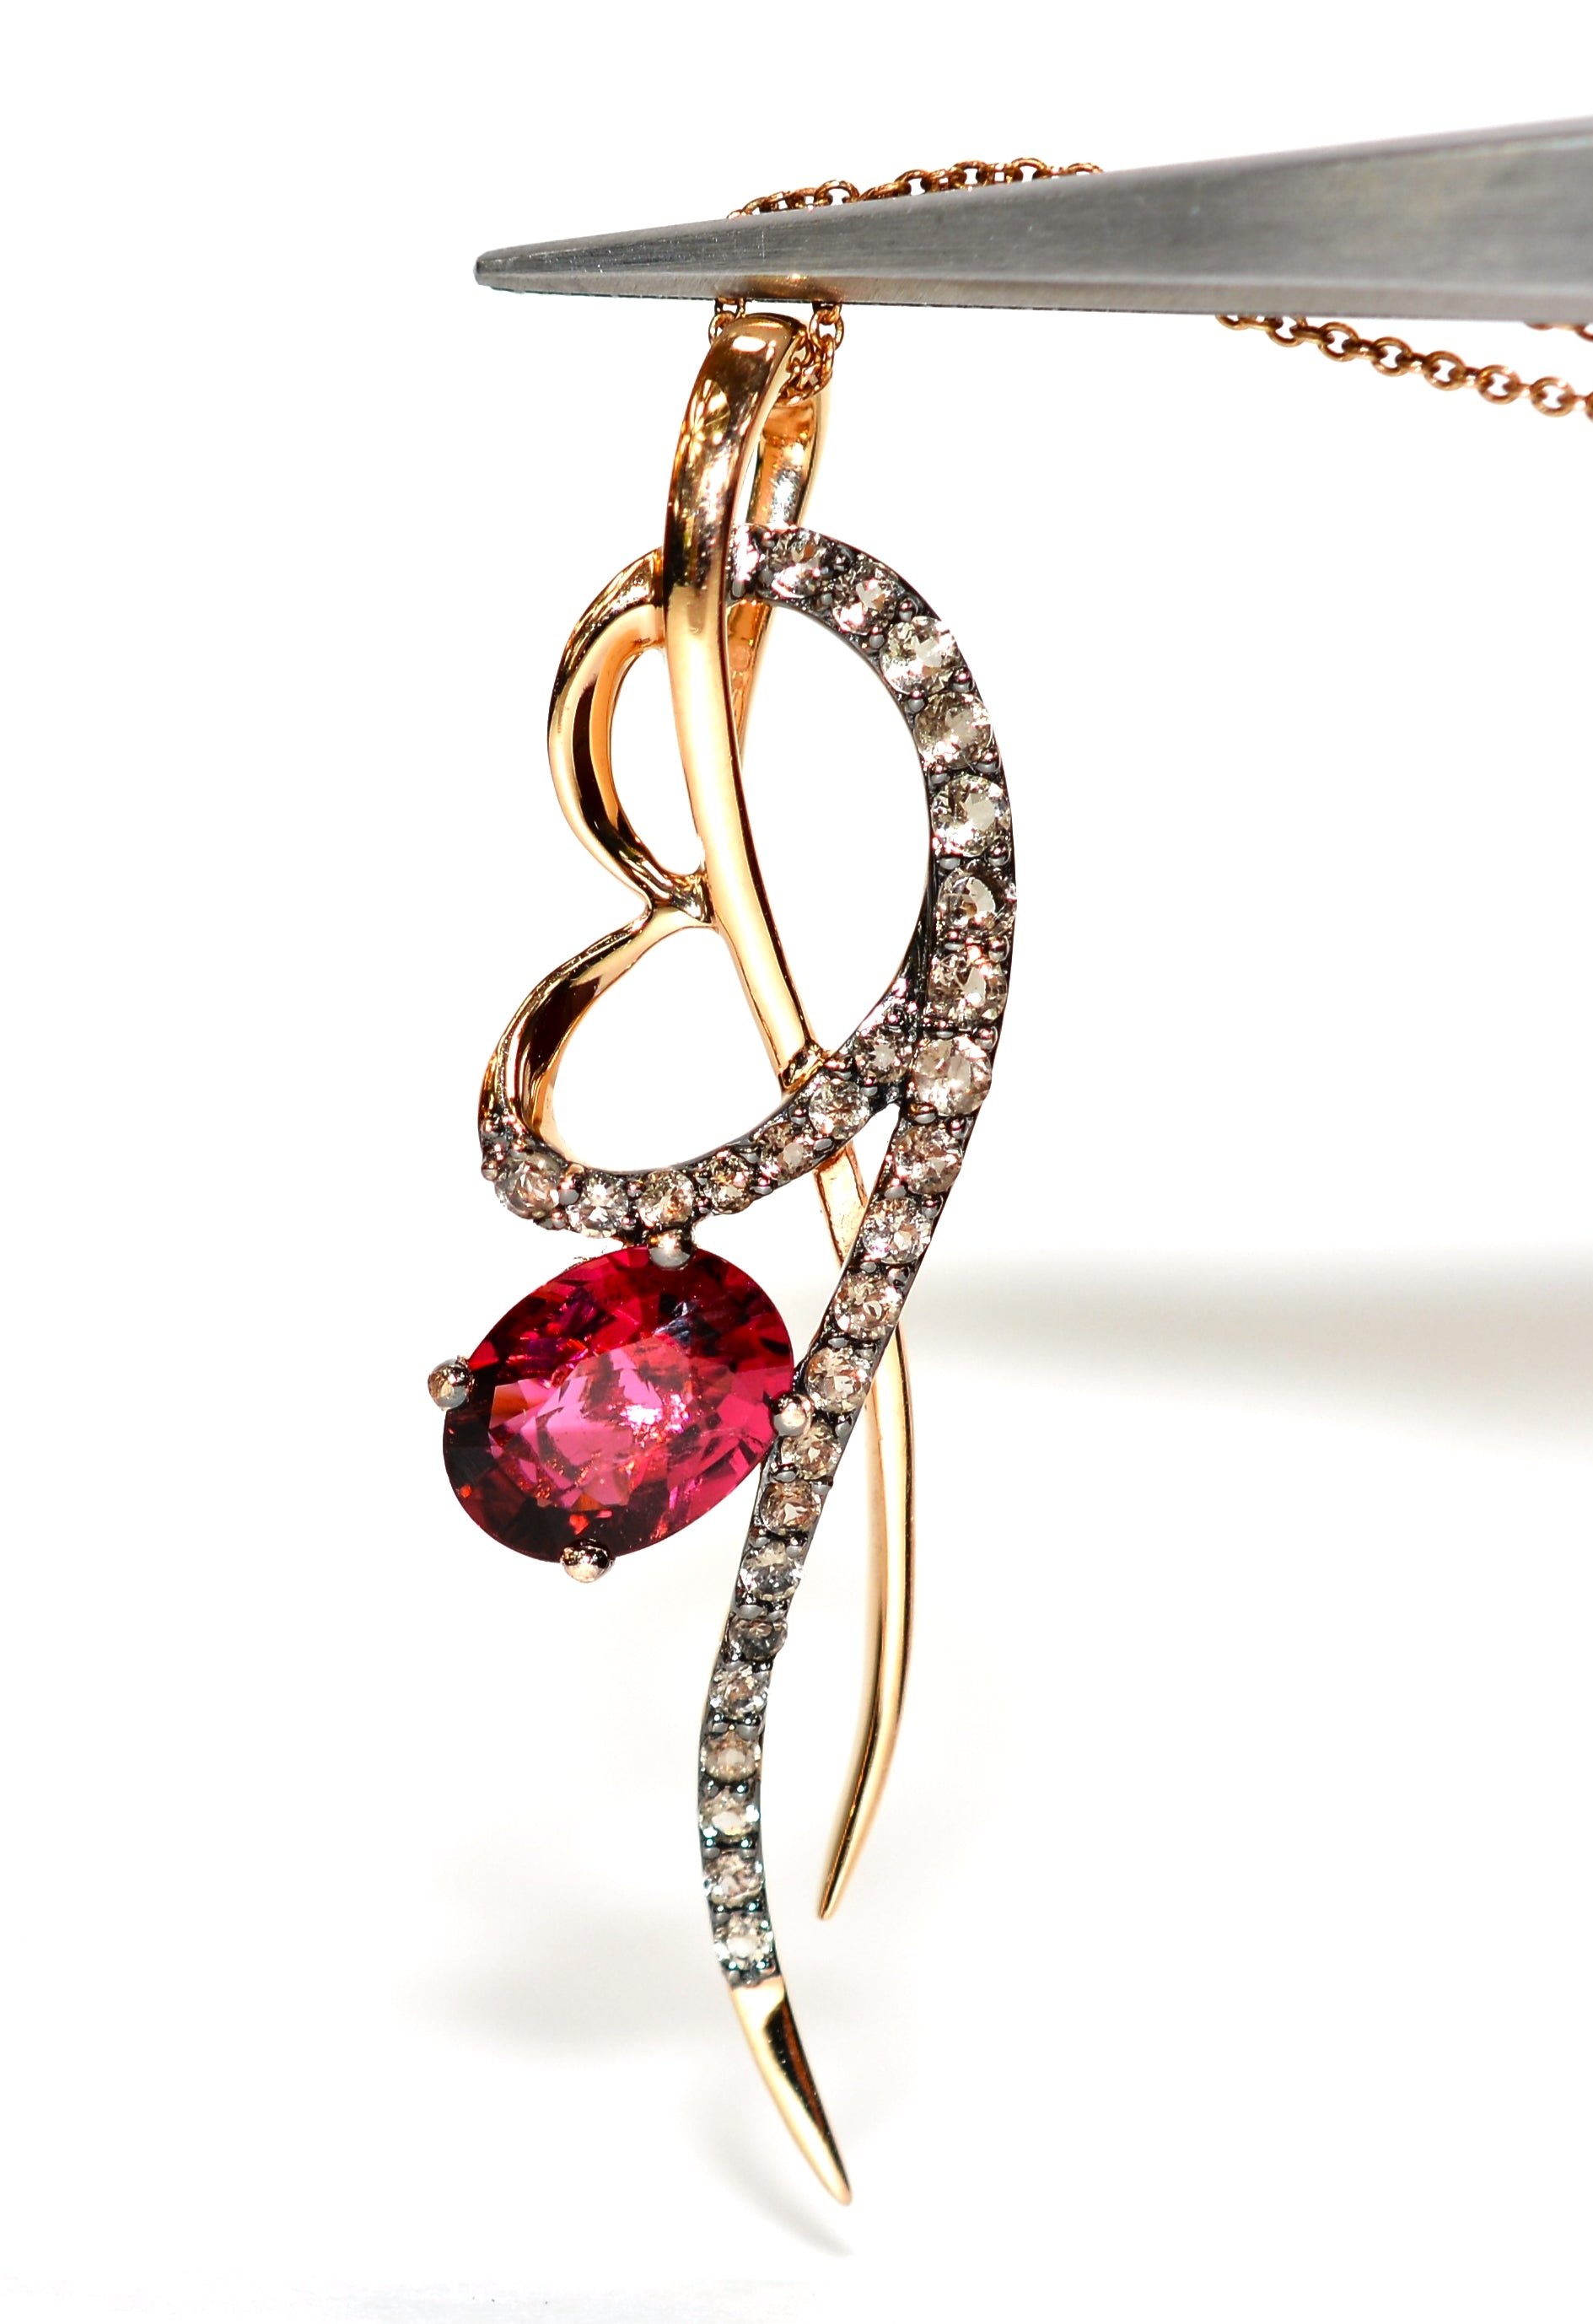 LeVian Natural Rubellite & Diamond Necklace 14K Solid Rose Gold 2.40tcw Rubellite Necklace Designer Necklace Cocktail Statement Necklace Red